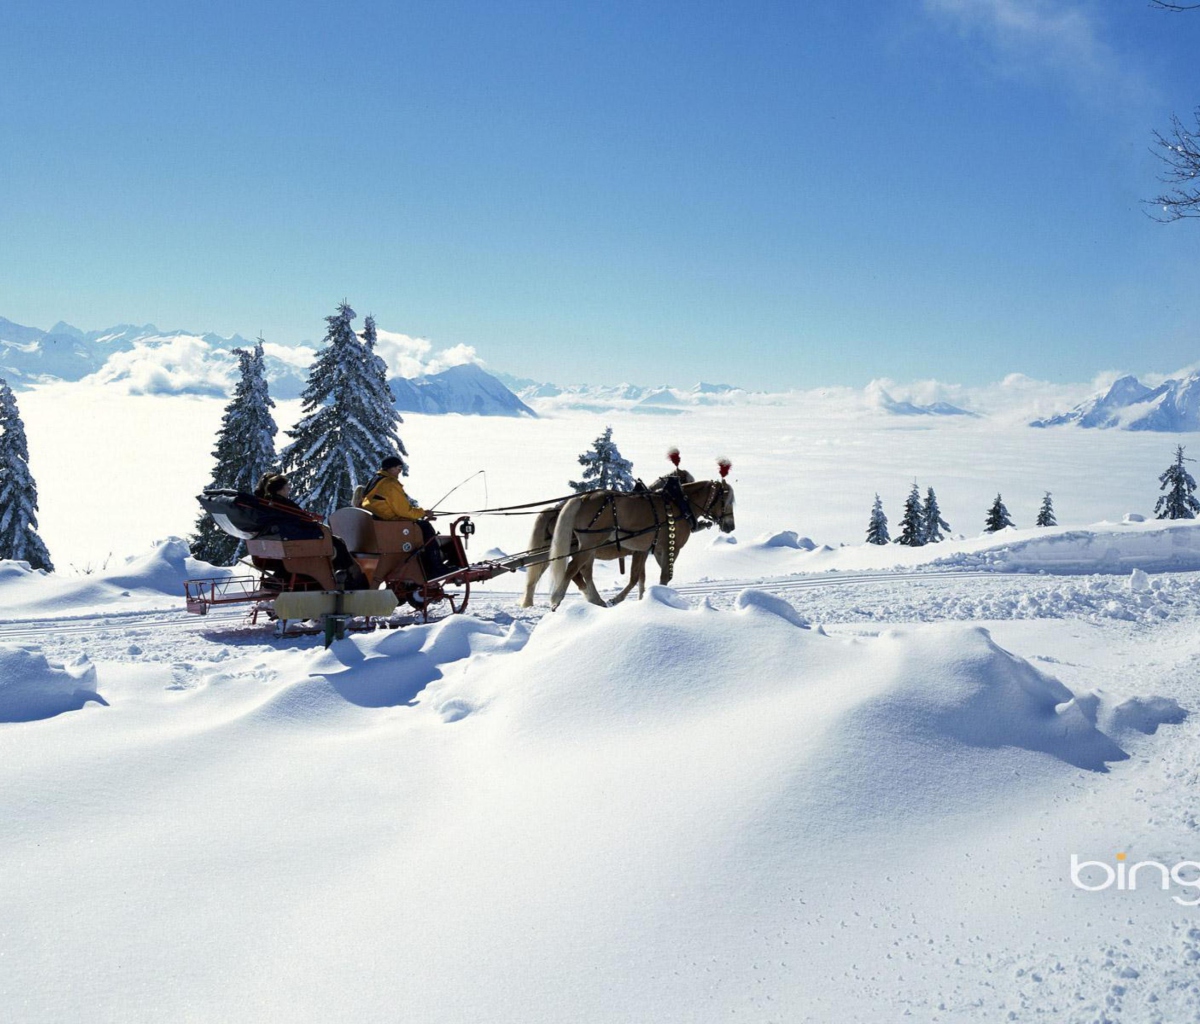 Winter Snow And Sleigh With Horses wallpaper 1200x1024